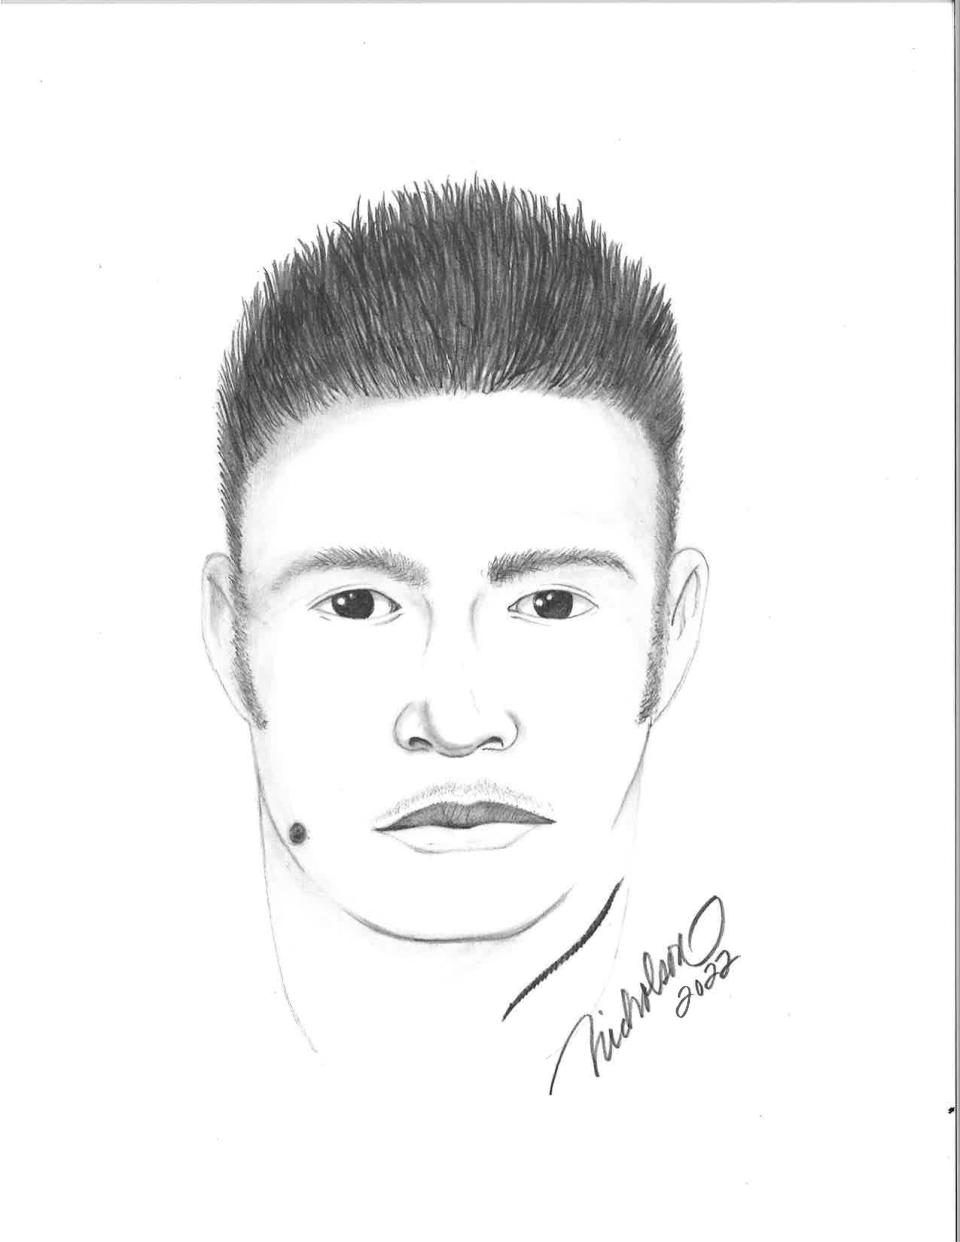 A police sketch of a man sought for questioning by Ojai authorities after a girl reported being approached by strangers.